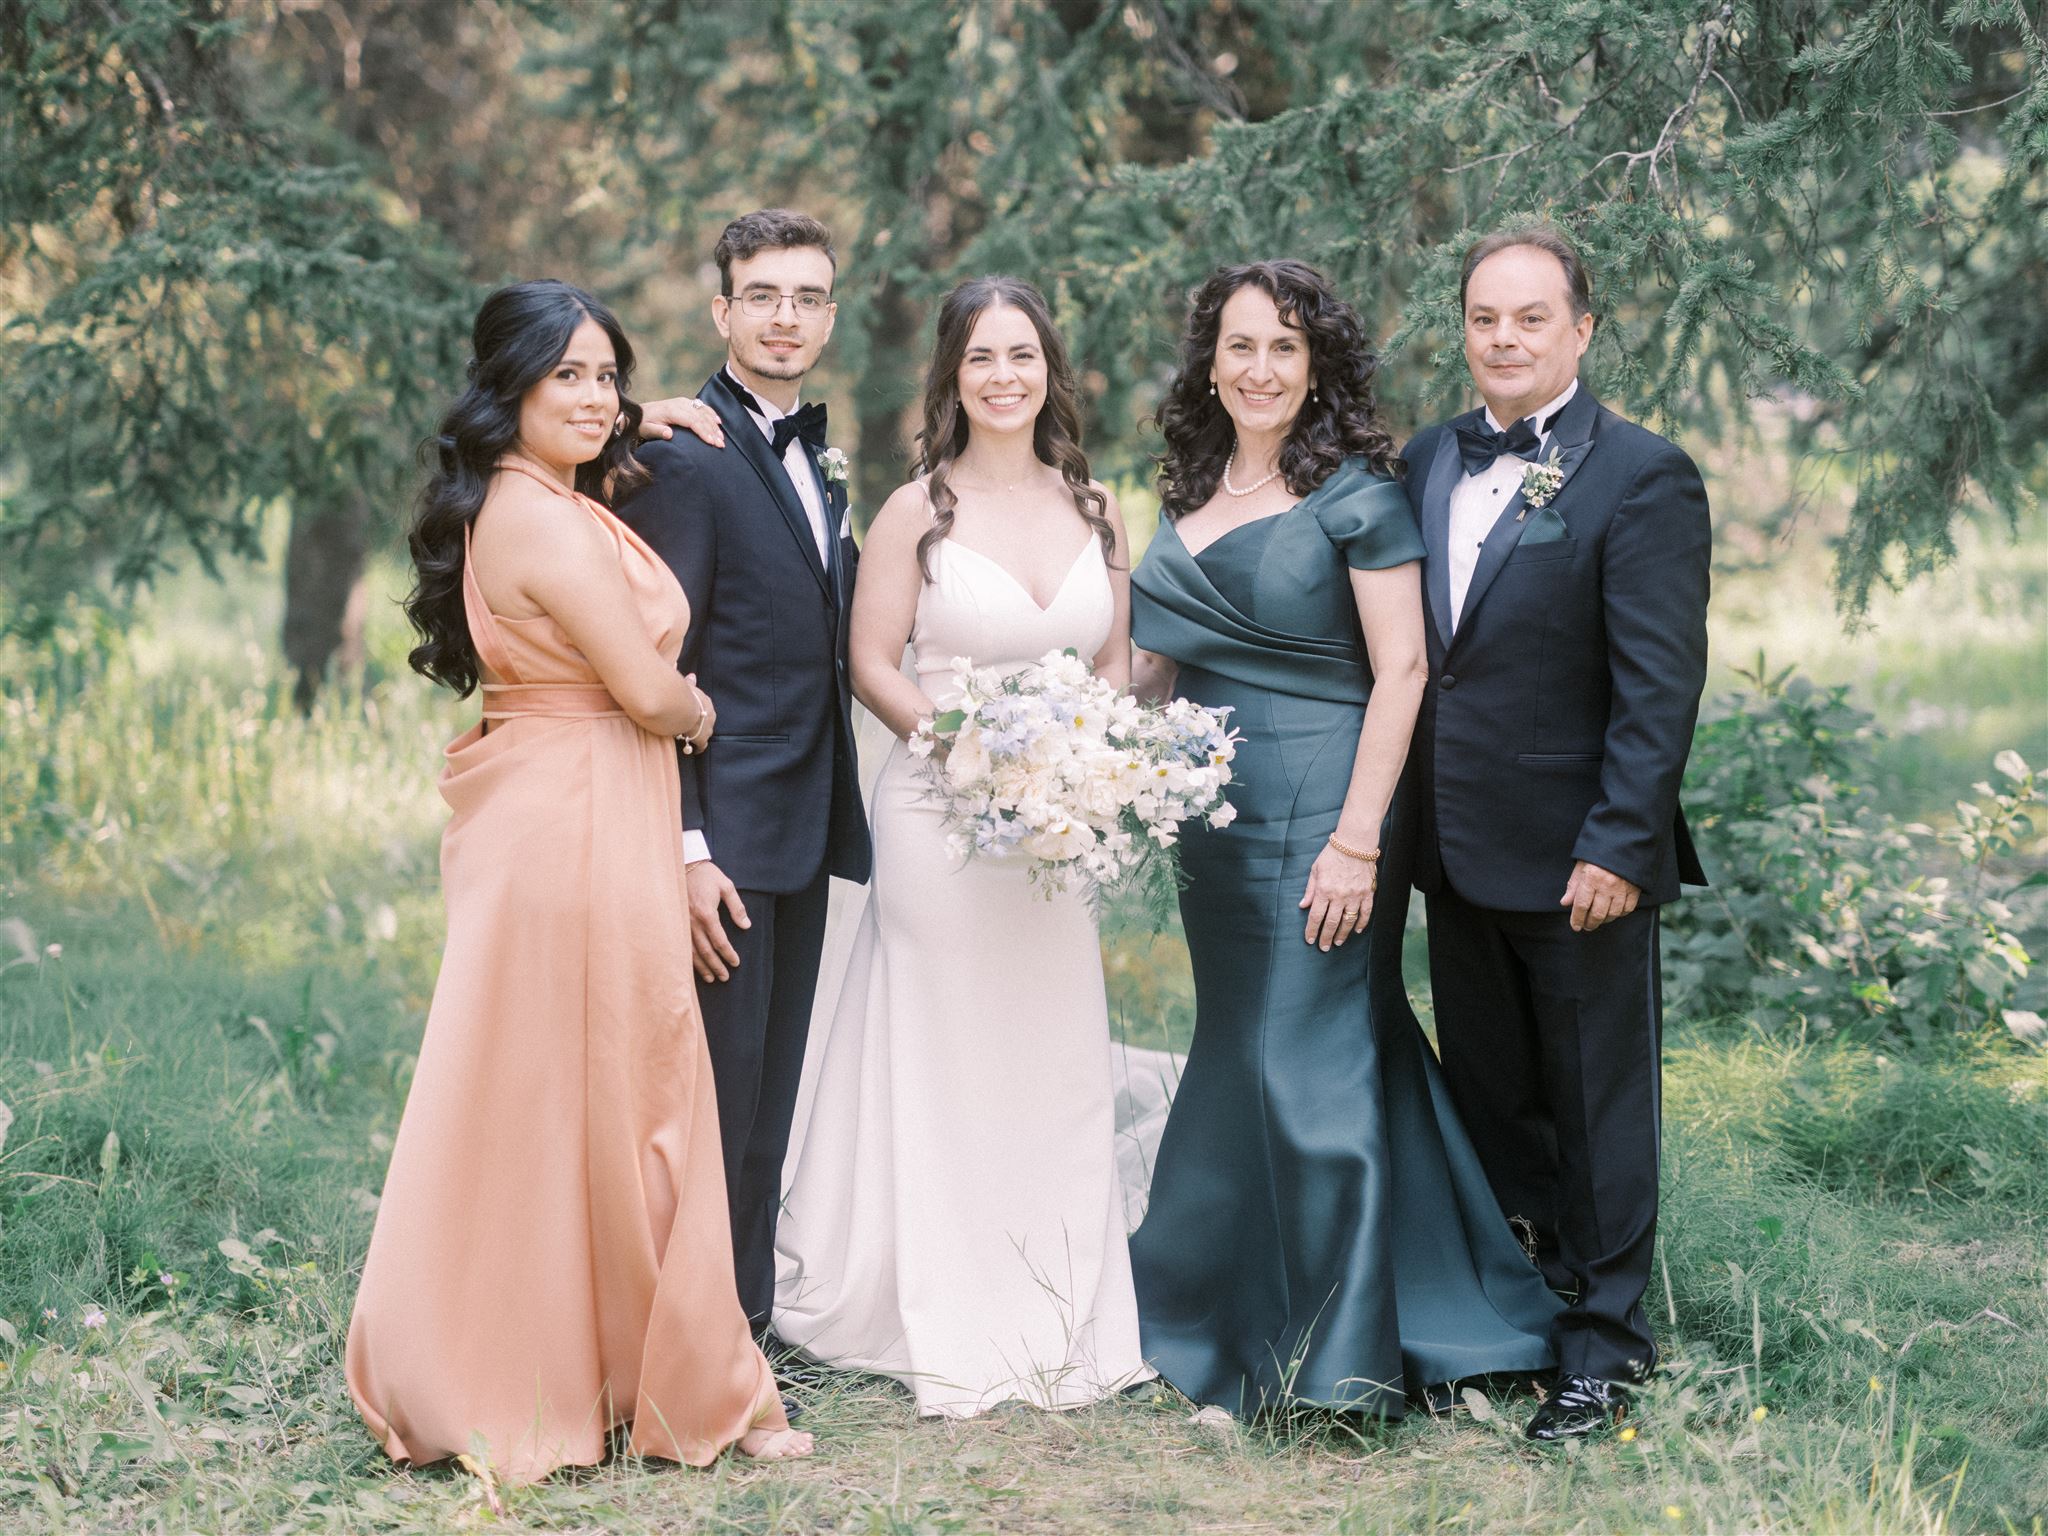 Tips for efficient family wedding portraits, wedding family photos, calgary family photographer